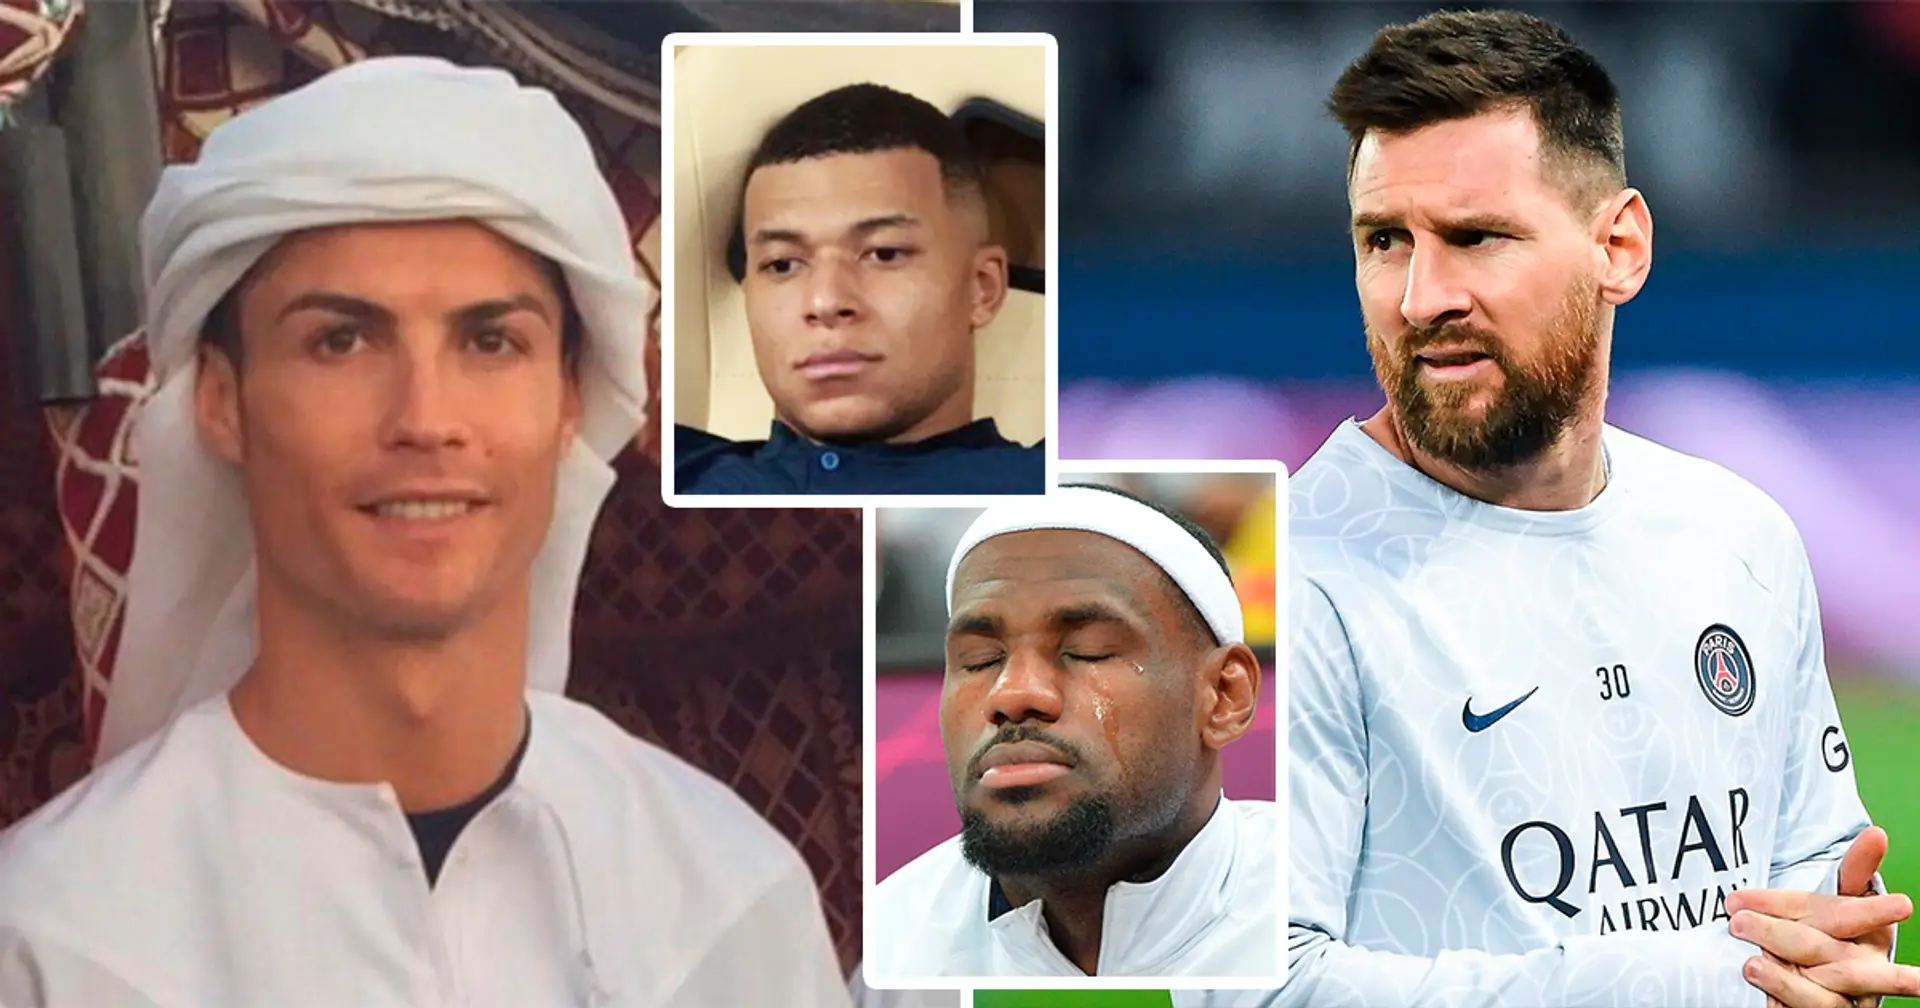 50 highest paid athletes in the world revealed - Mbappe's only 3rd